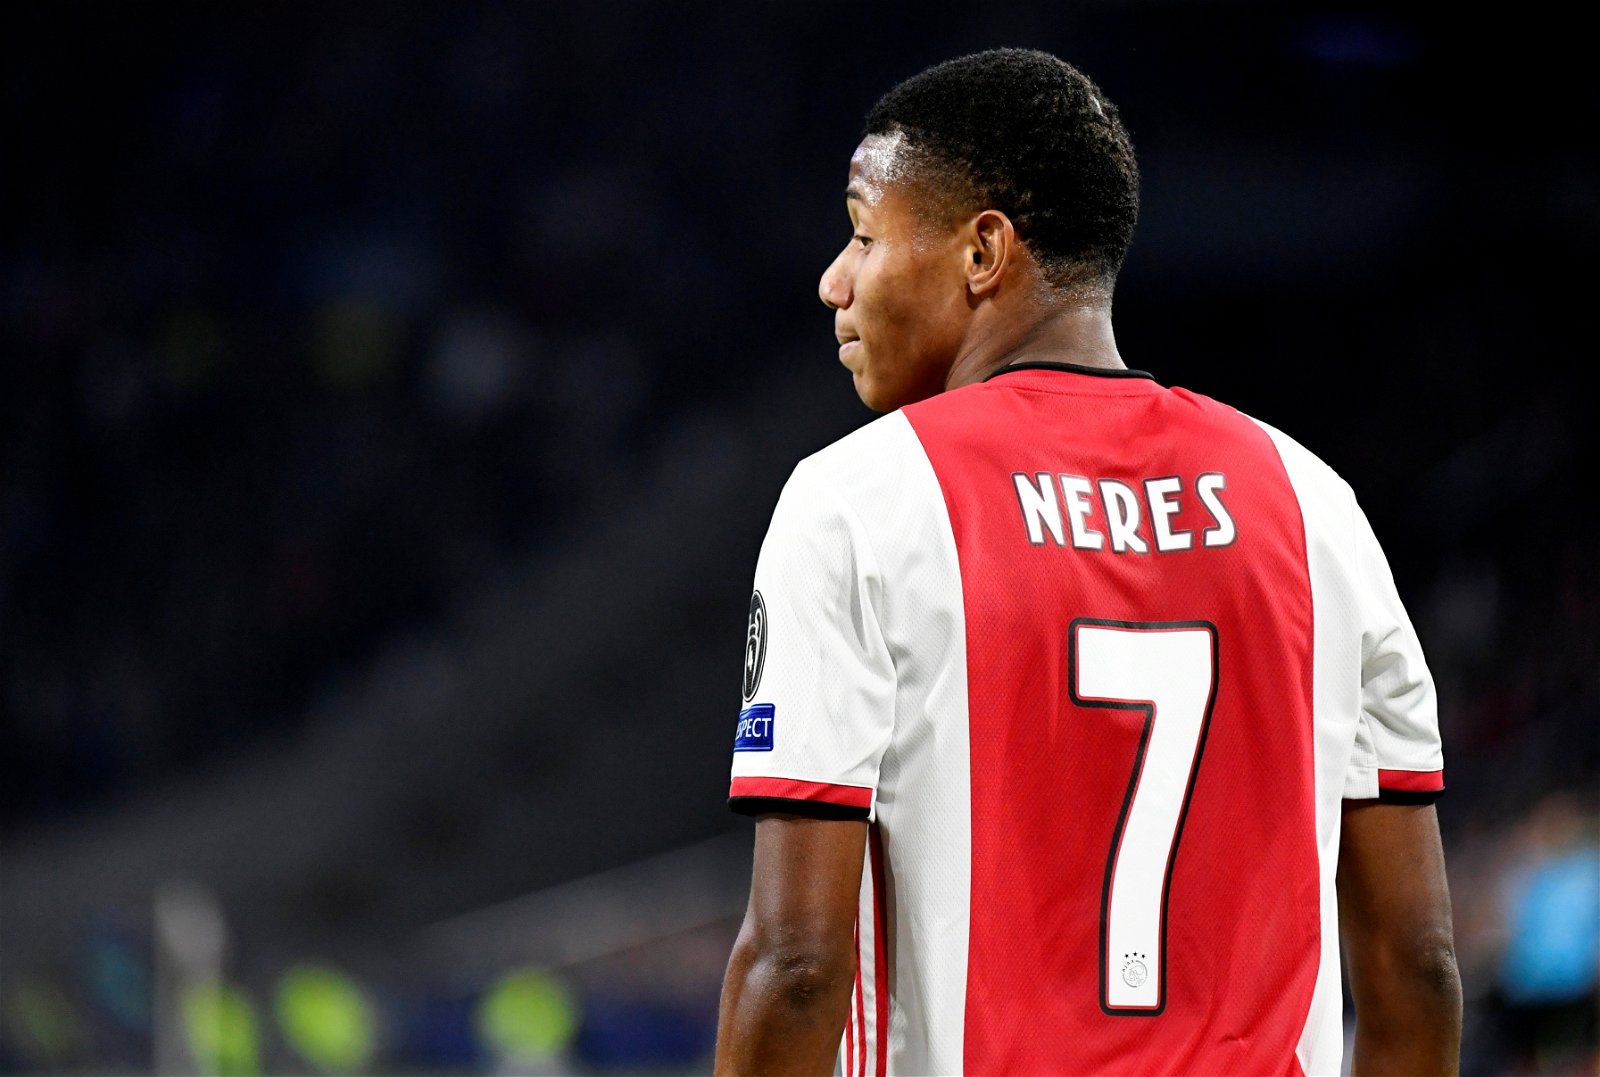 Ajax winger David Neres ruled out until 2020 with knee injury